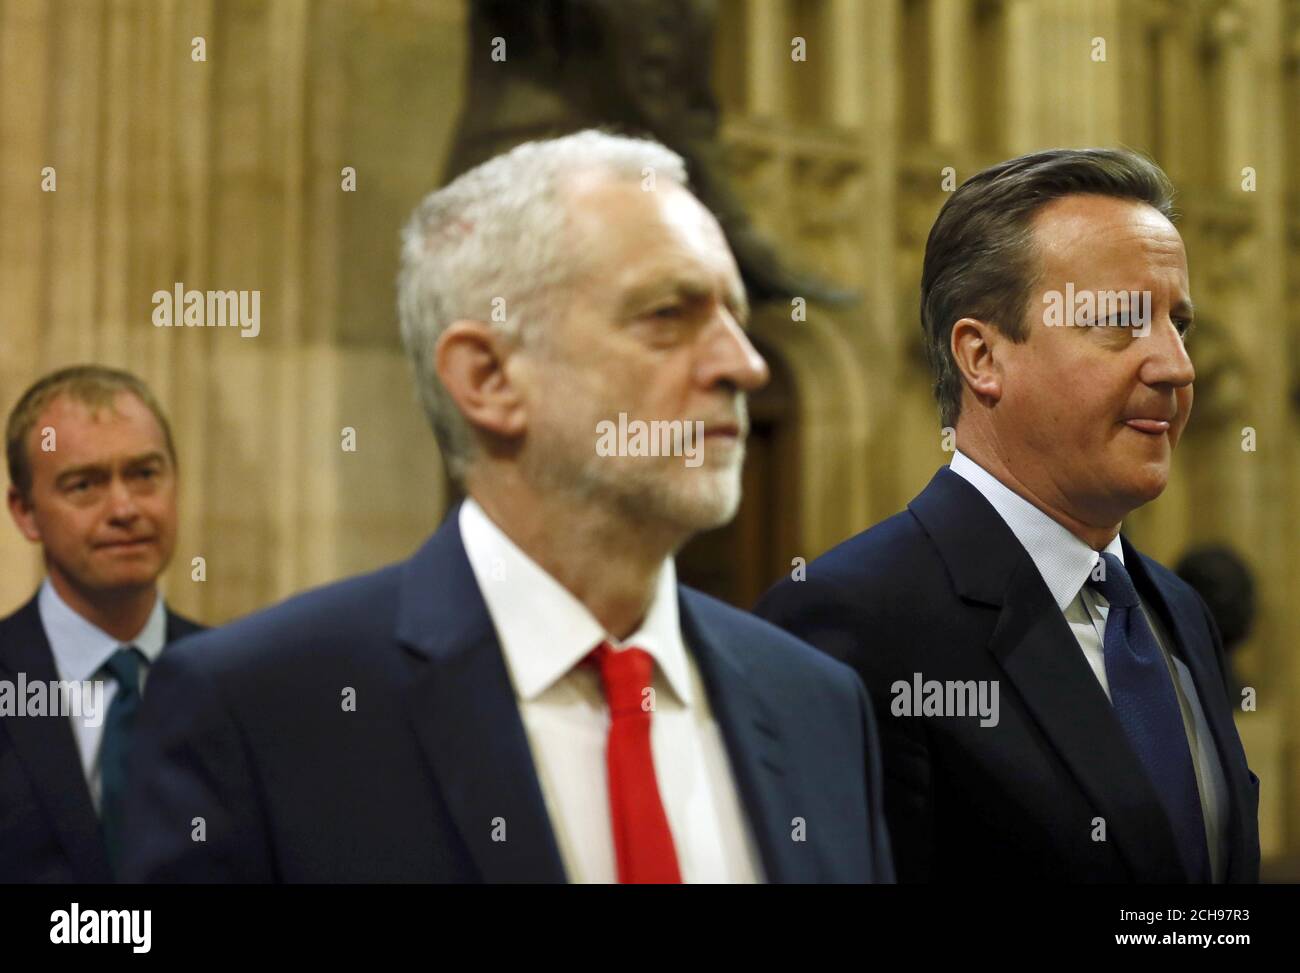 Prime Minister David Cameron (right) and Labour Party leader Jeremy Corbyn return to the House of Commons after the State Opening of Parliament, at the Palace of Westminster in London. Stock Photo